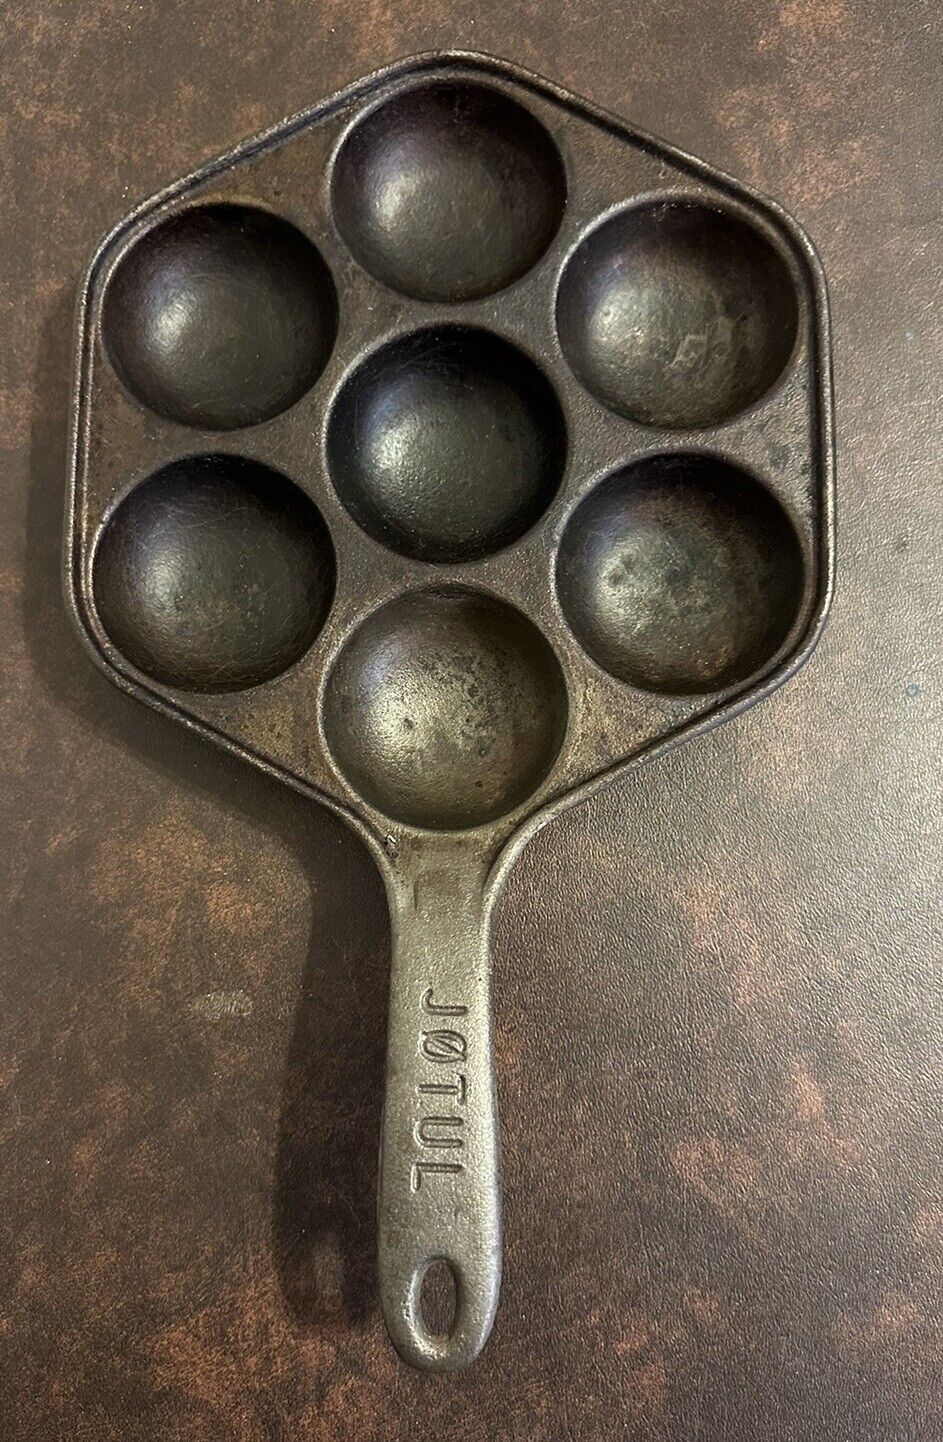 Vintage Jotul hexagon Cast Iron Pan Aebleskiver Biscuits Muffins Made In Norway